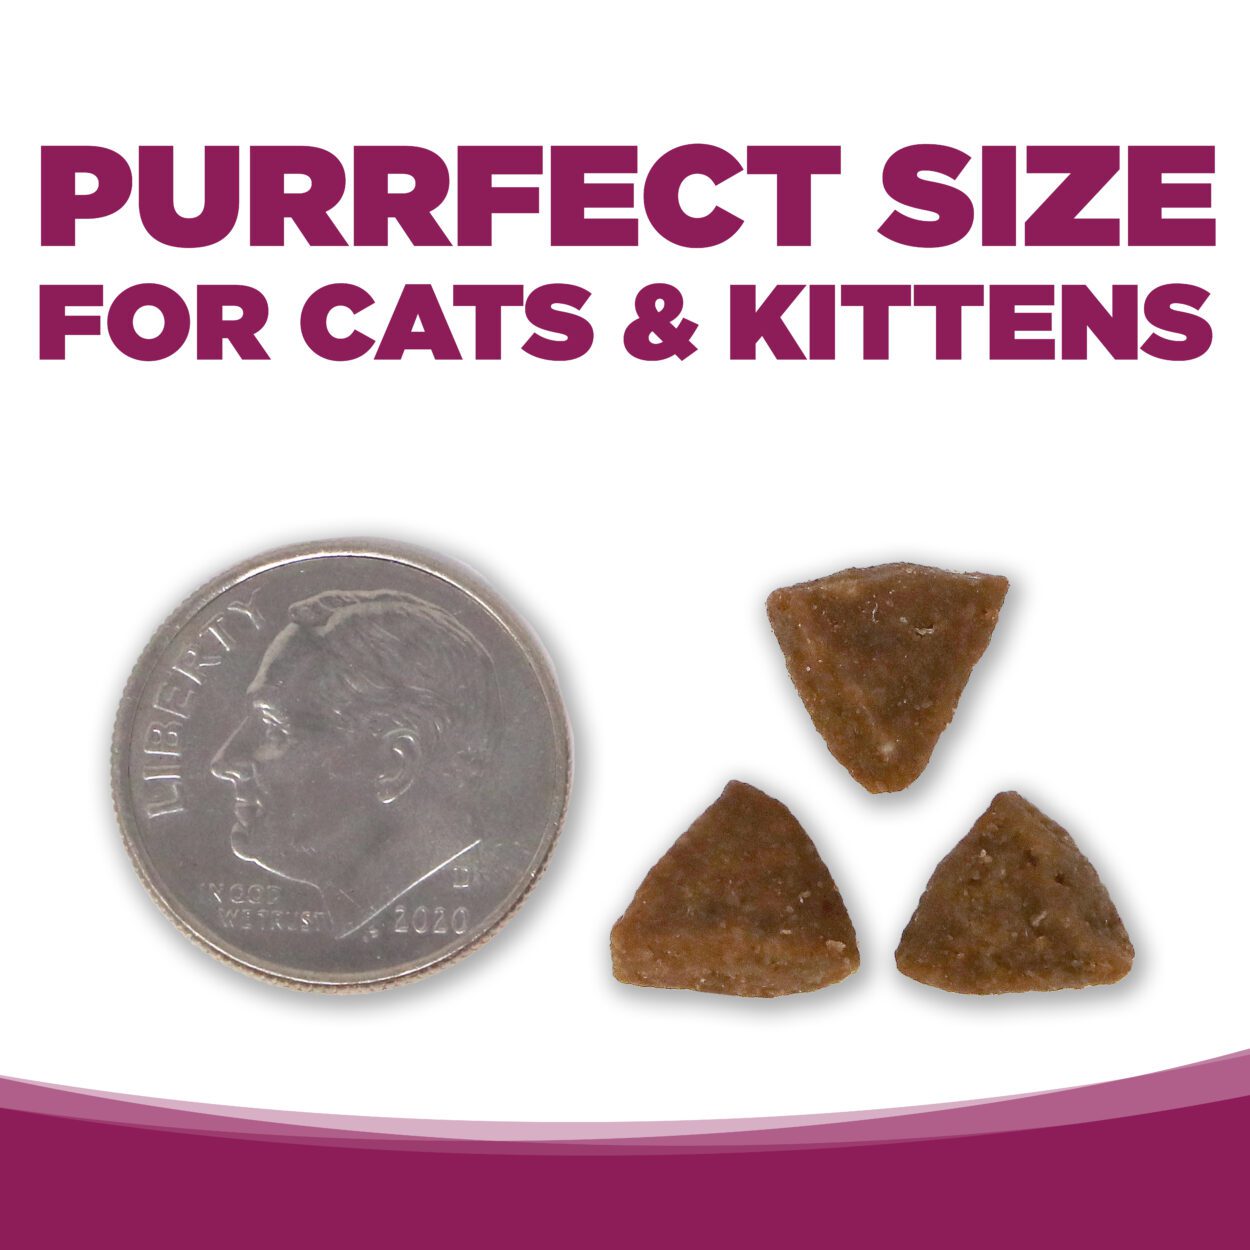 PURRFECT SIZE FOR CATS & KITTENS